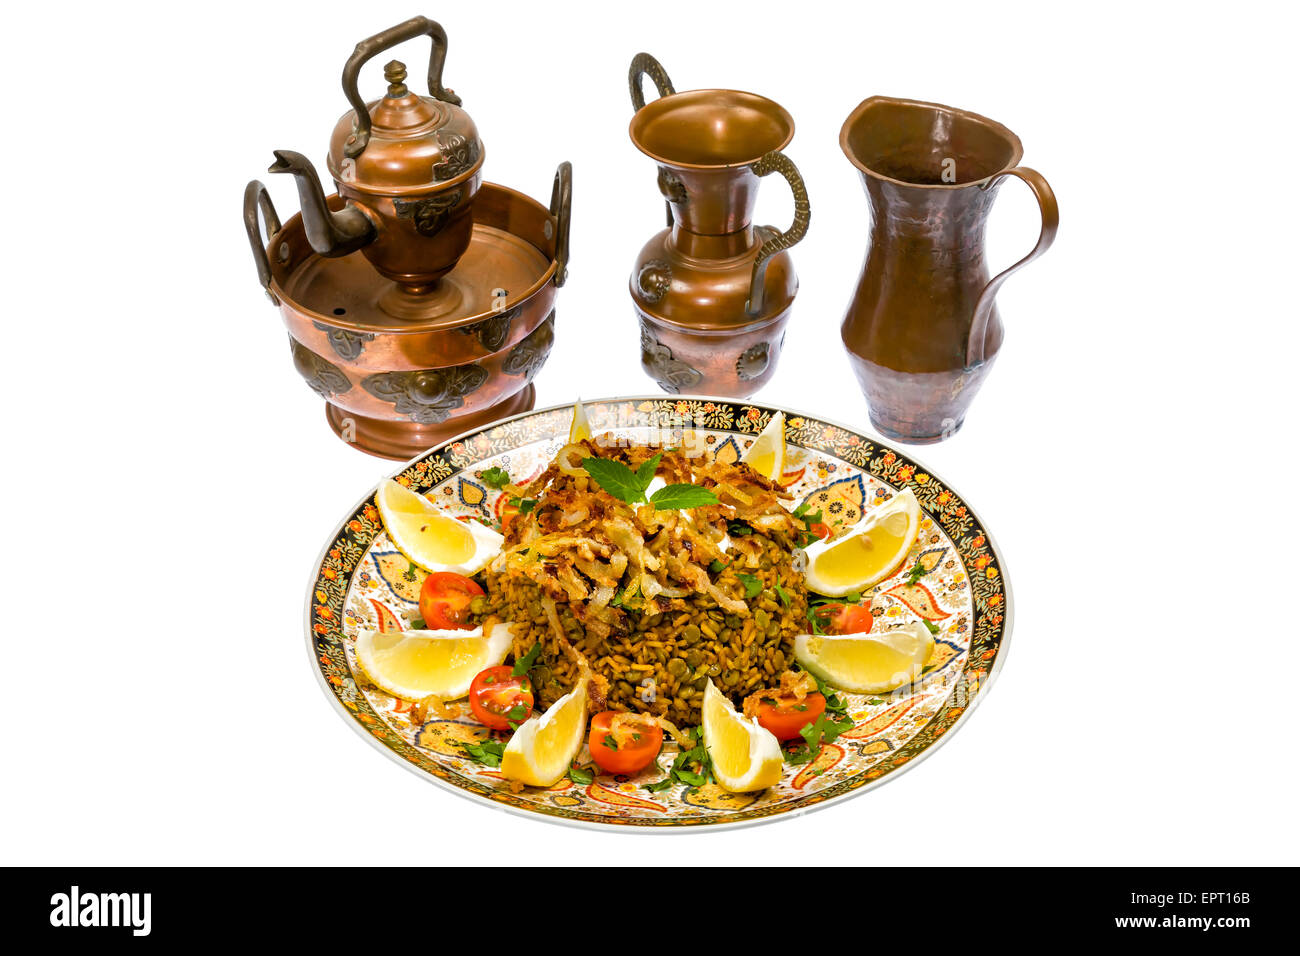 Mejadra - traditional Arabic dish of rice and lentils Stock Photo